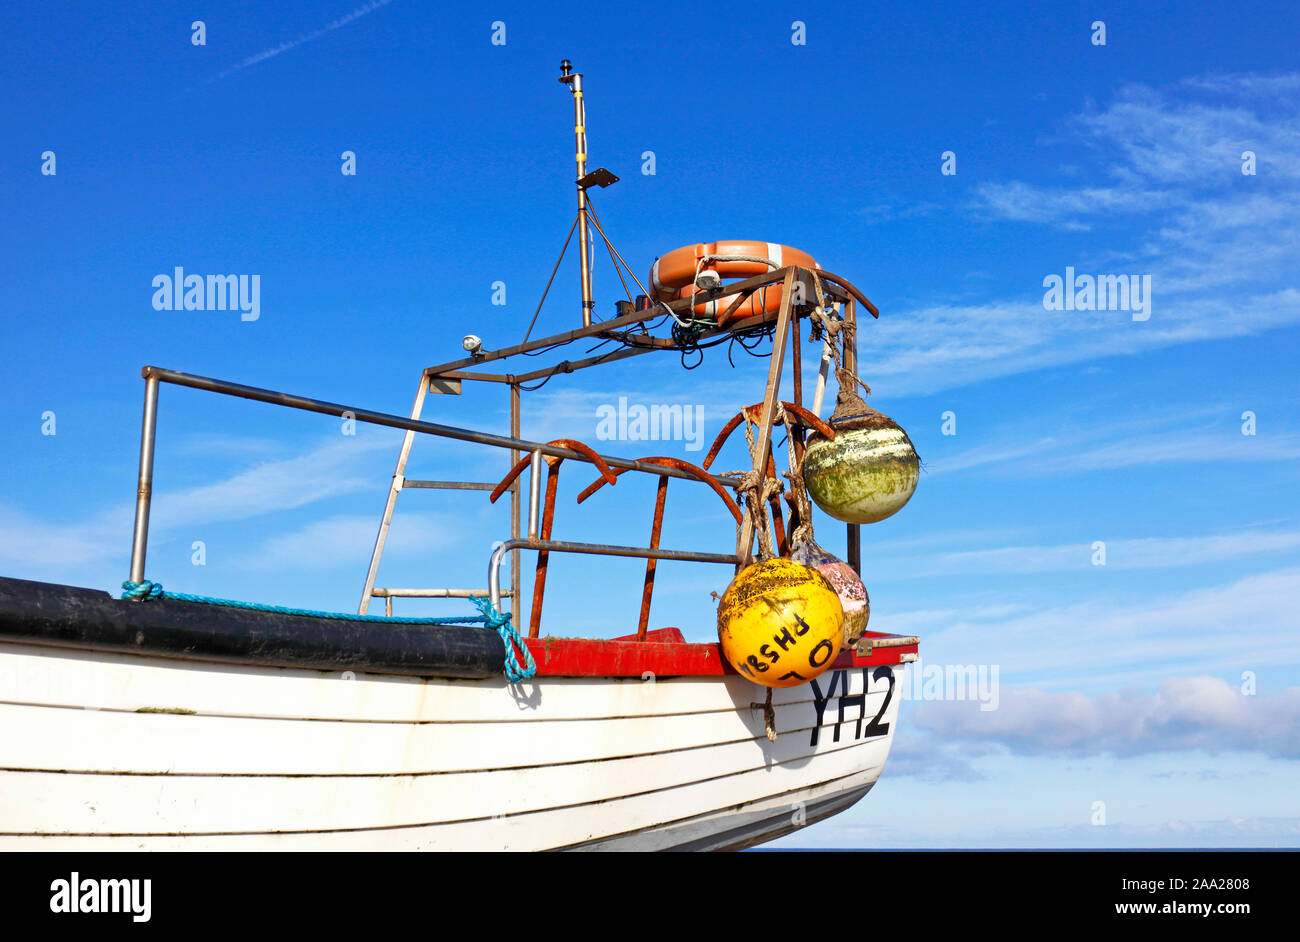 The stern of an inshore fishing boat with buoys and anchors on a North Norfolk beach at Cley-next-the-Sea, Norfolk, England, United Kingdom, Europe. Stock Photo